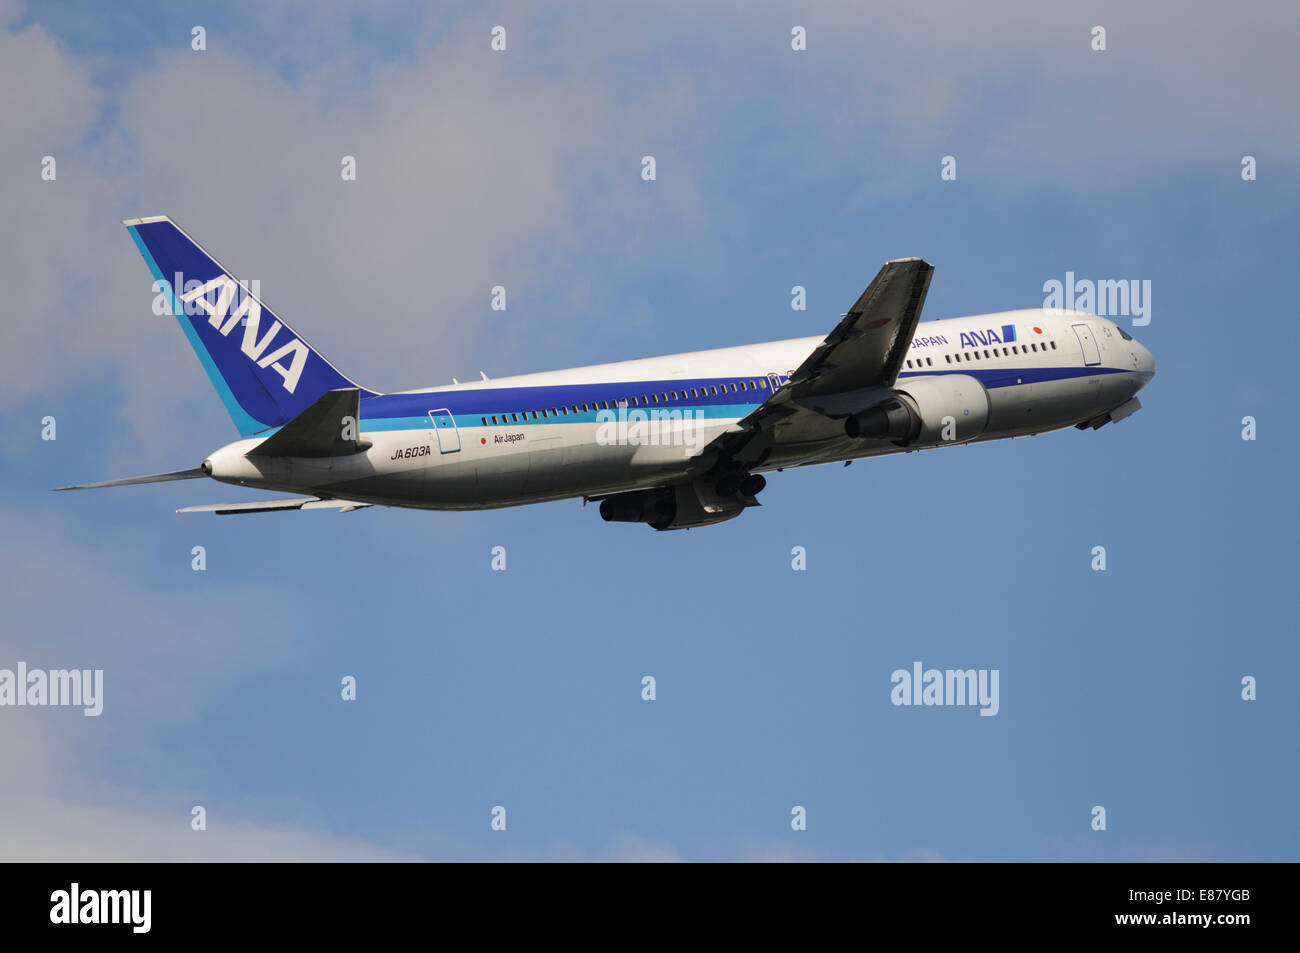 All Nippon Airways ANA Boeing 767-300ER JA603A wide-body airliner airborne Stock Photo